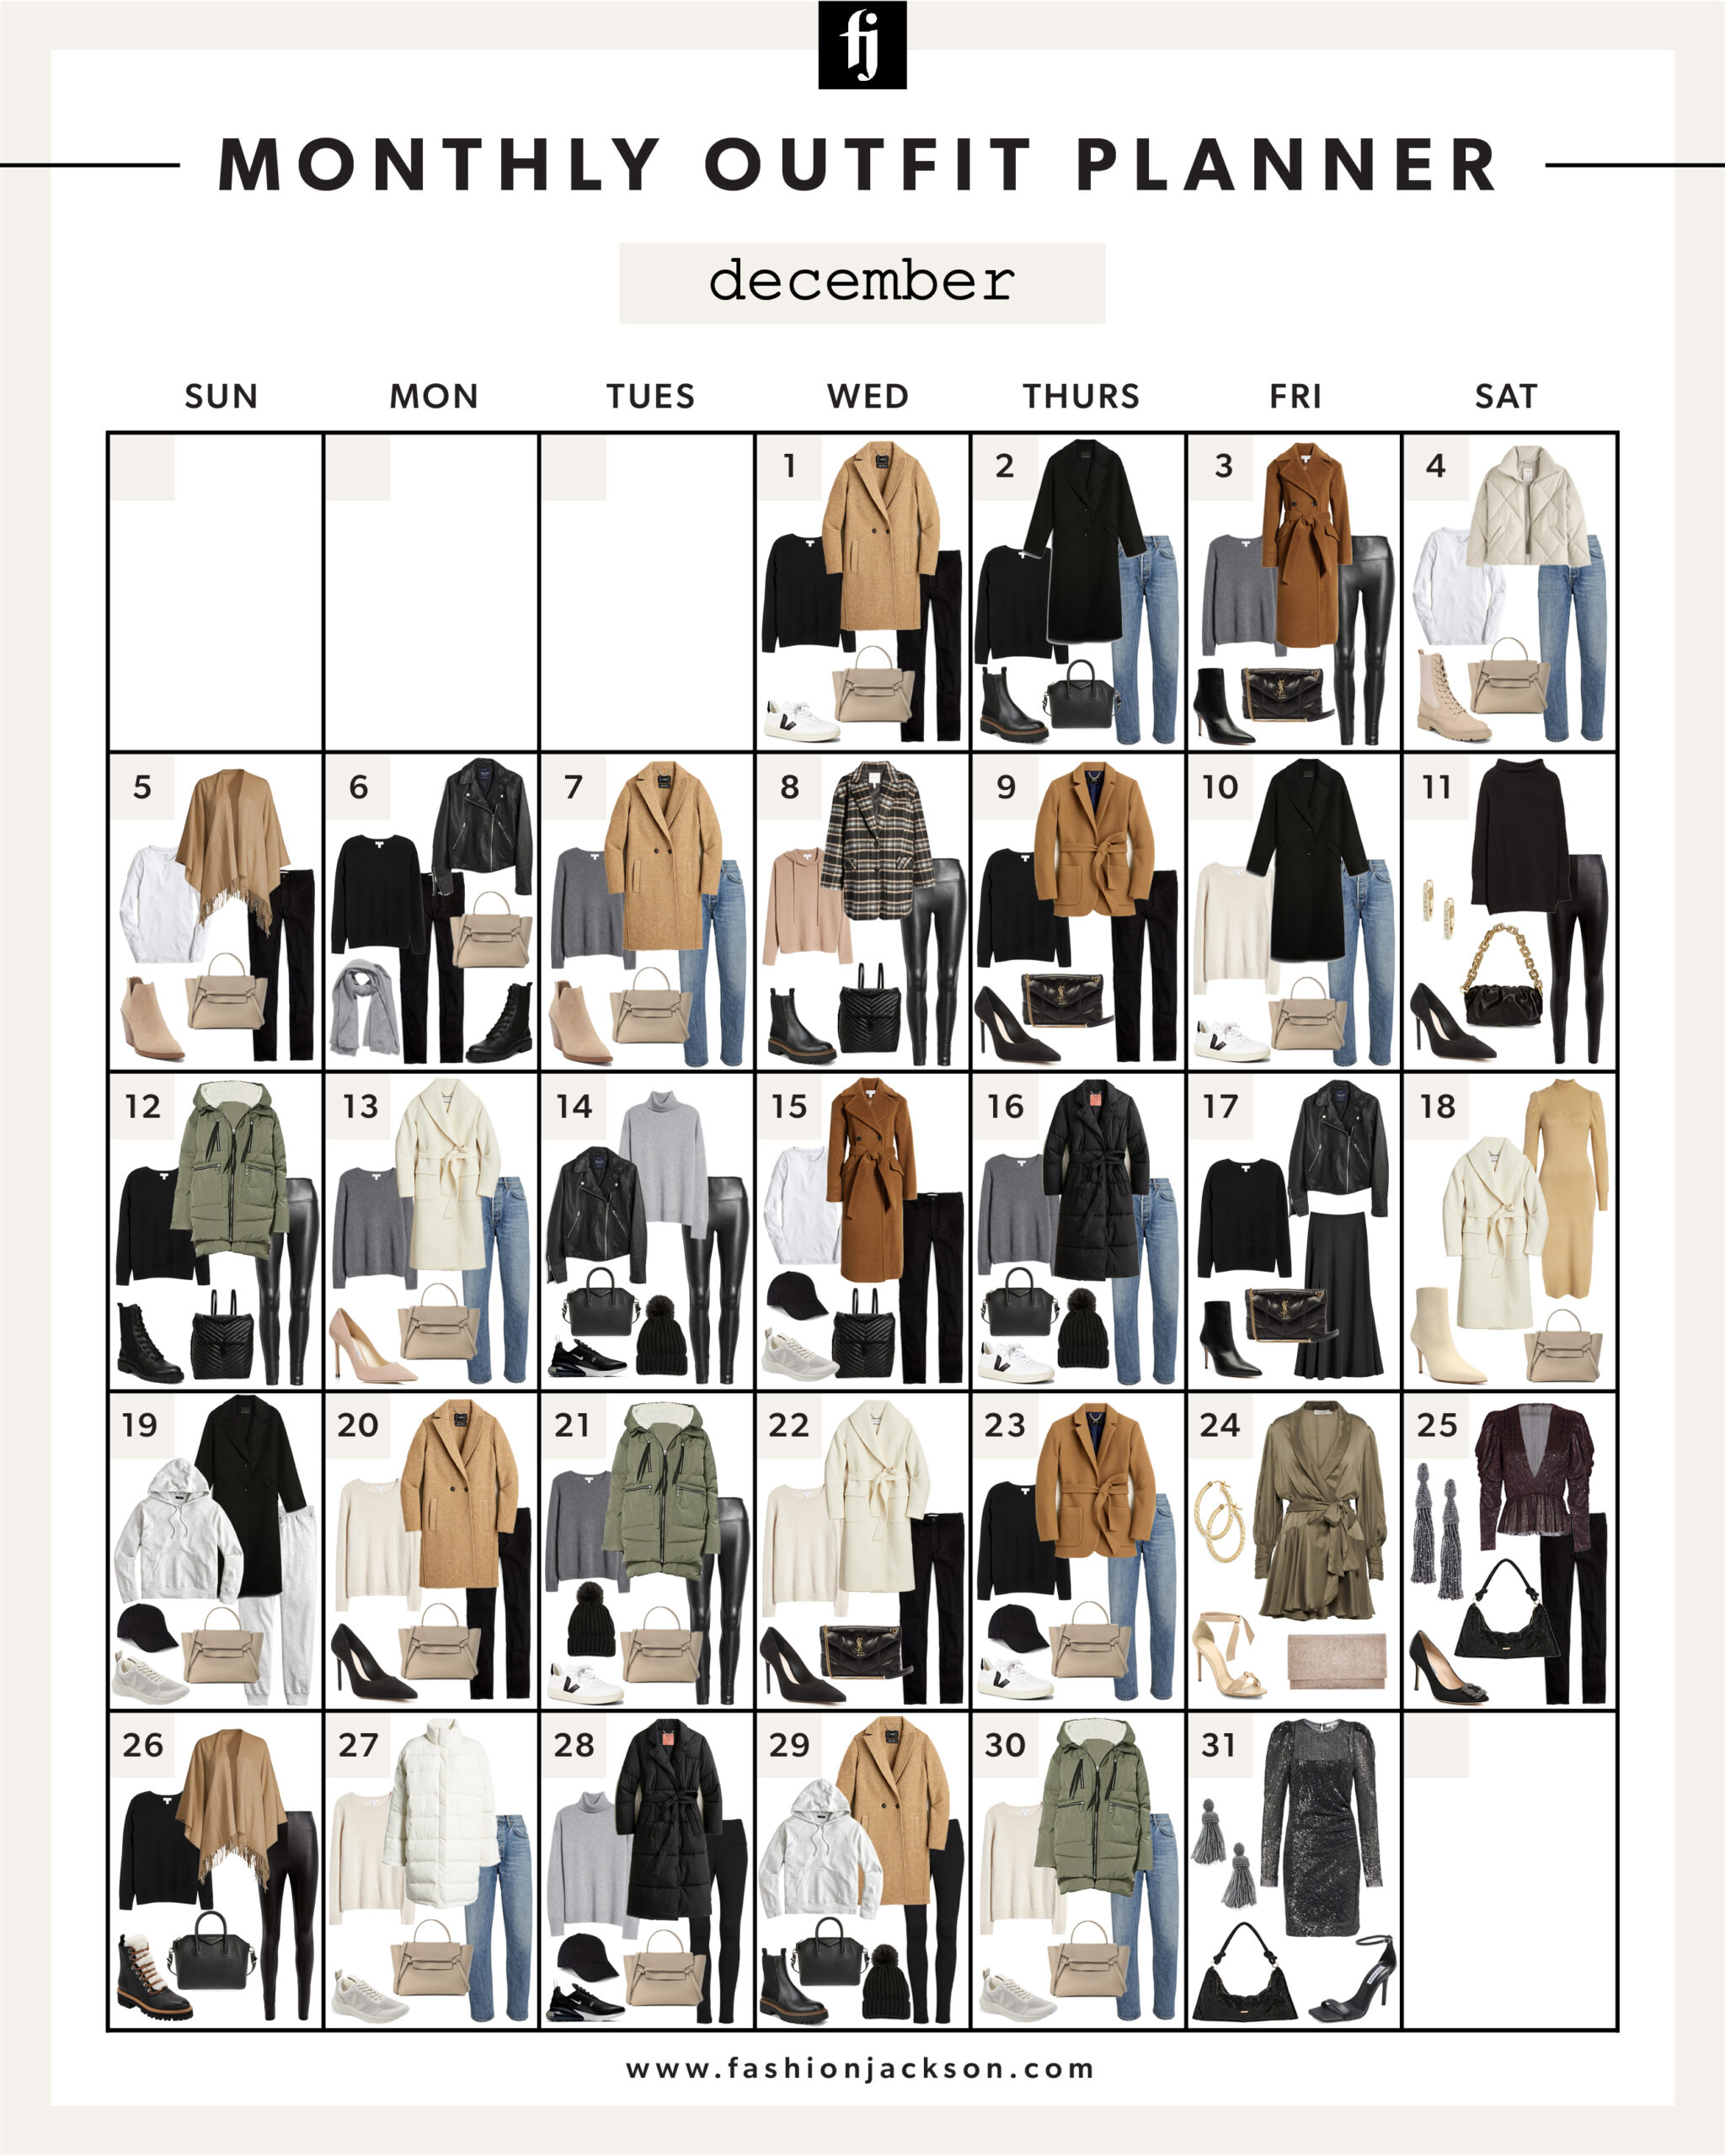 Outfit Ideas for Every Day in December - Fashion Jackson